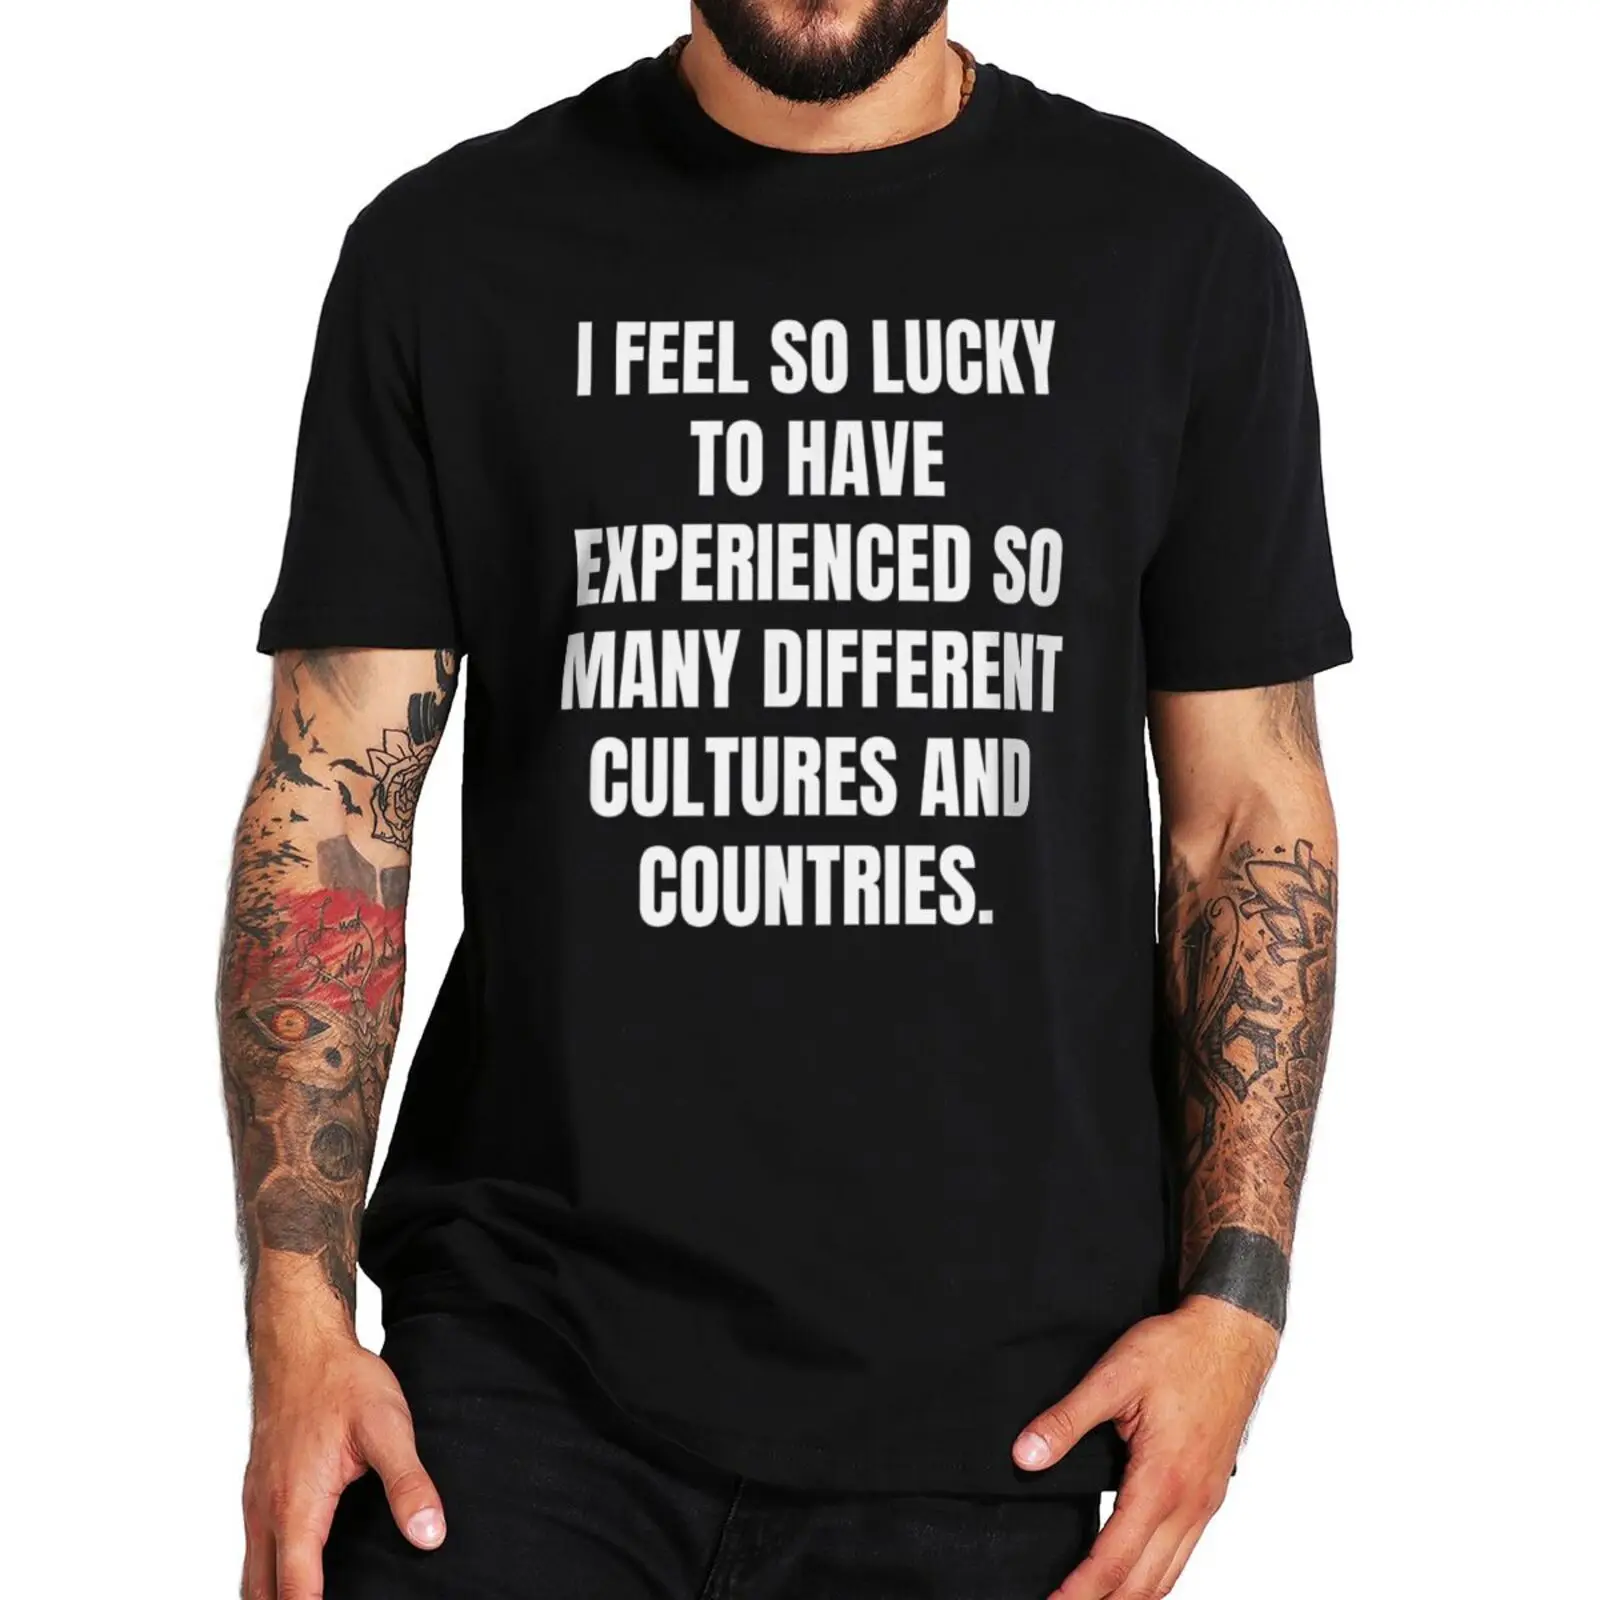 

I Feel So Lucky To Have Experienced So Many Different T-Shirt 2022 Funny Saying Gifts Tee Tops Cotton Summer Casual T Shirt